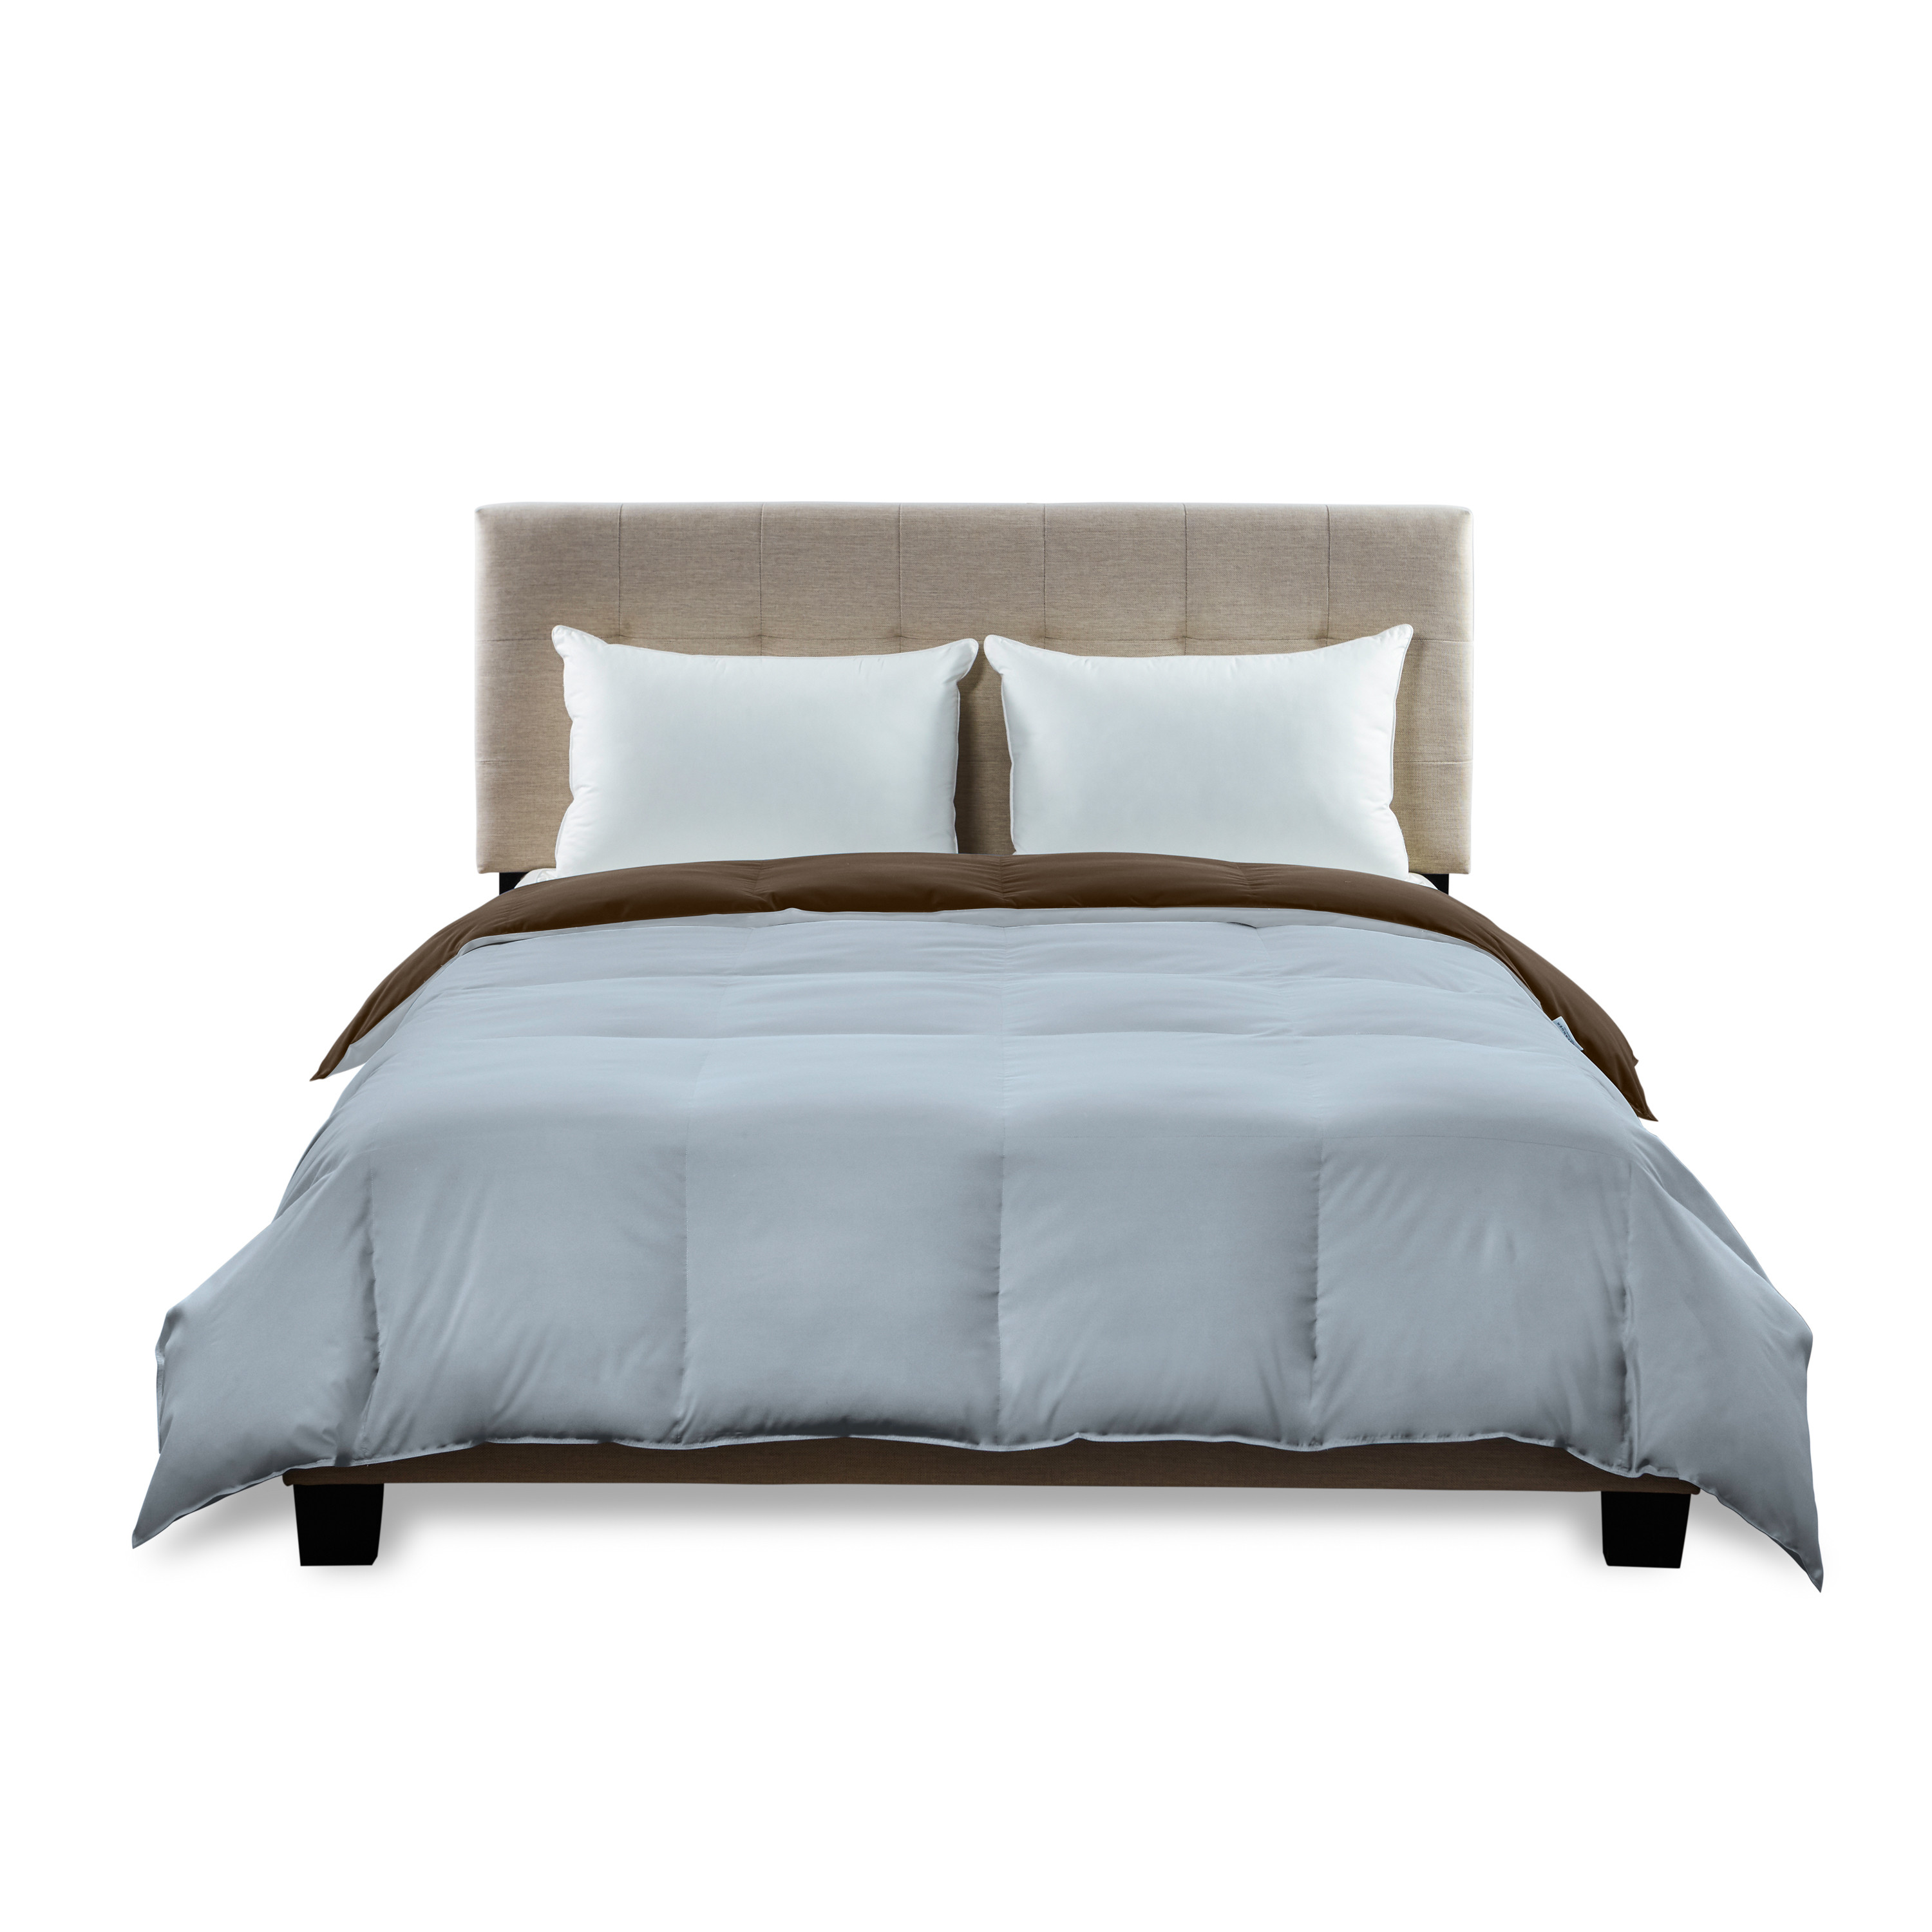 Dreamy Nights Reversible Down Comforter in Choice of Colors and Sizes - image 3 of 7